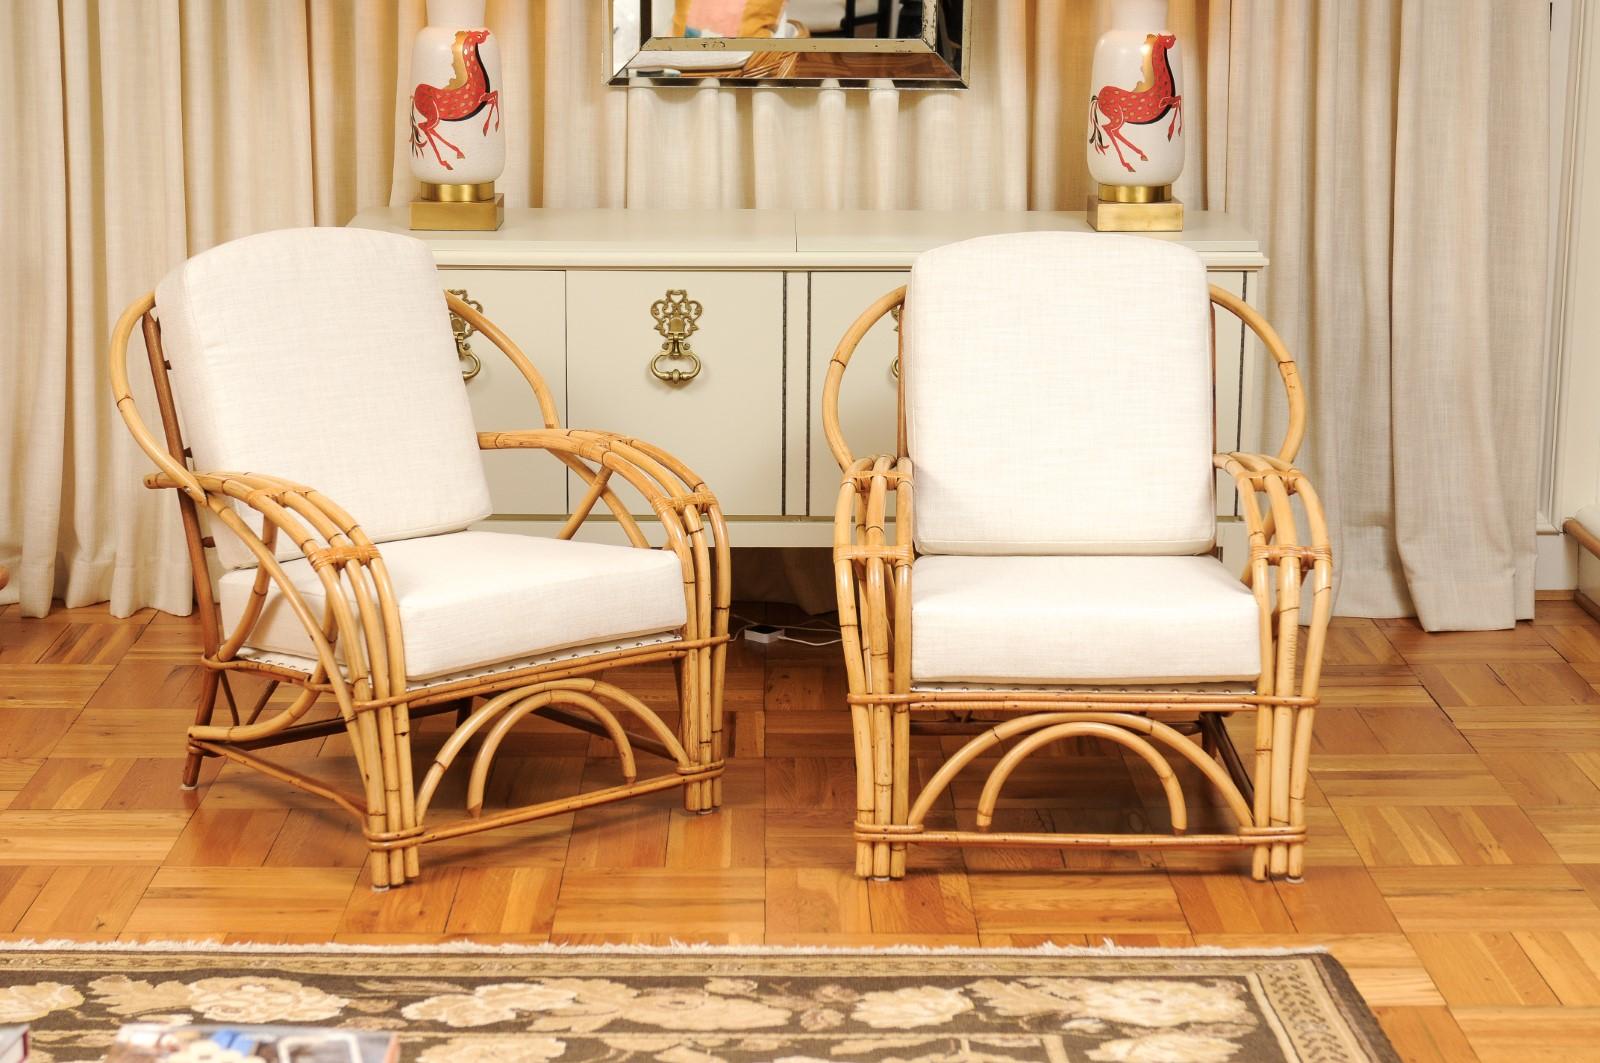 These magnificent lounge chairs are shipped as professionally photographed and described in the listing narrative: Meticulously professionally restored, expertly upholstered and Installation Ready. Expert custom upholstery service is